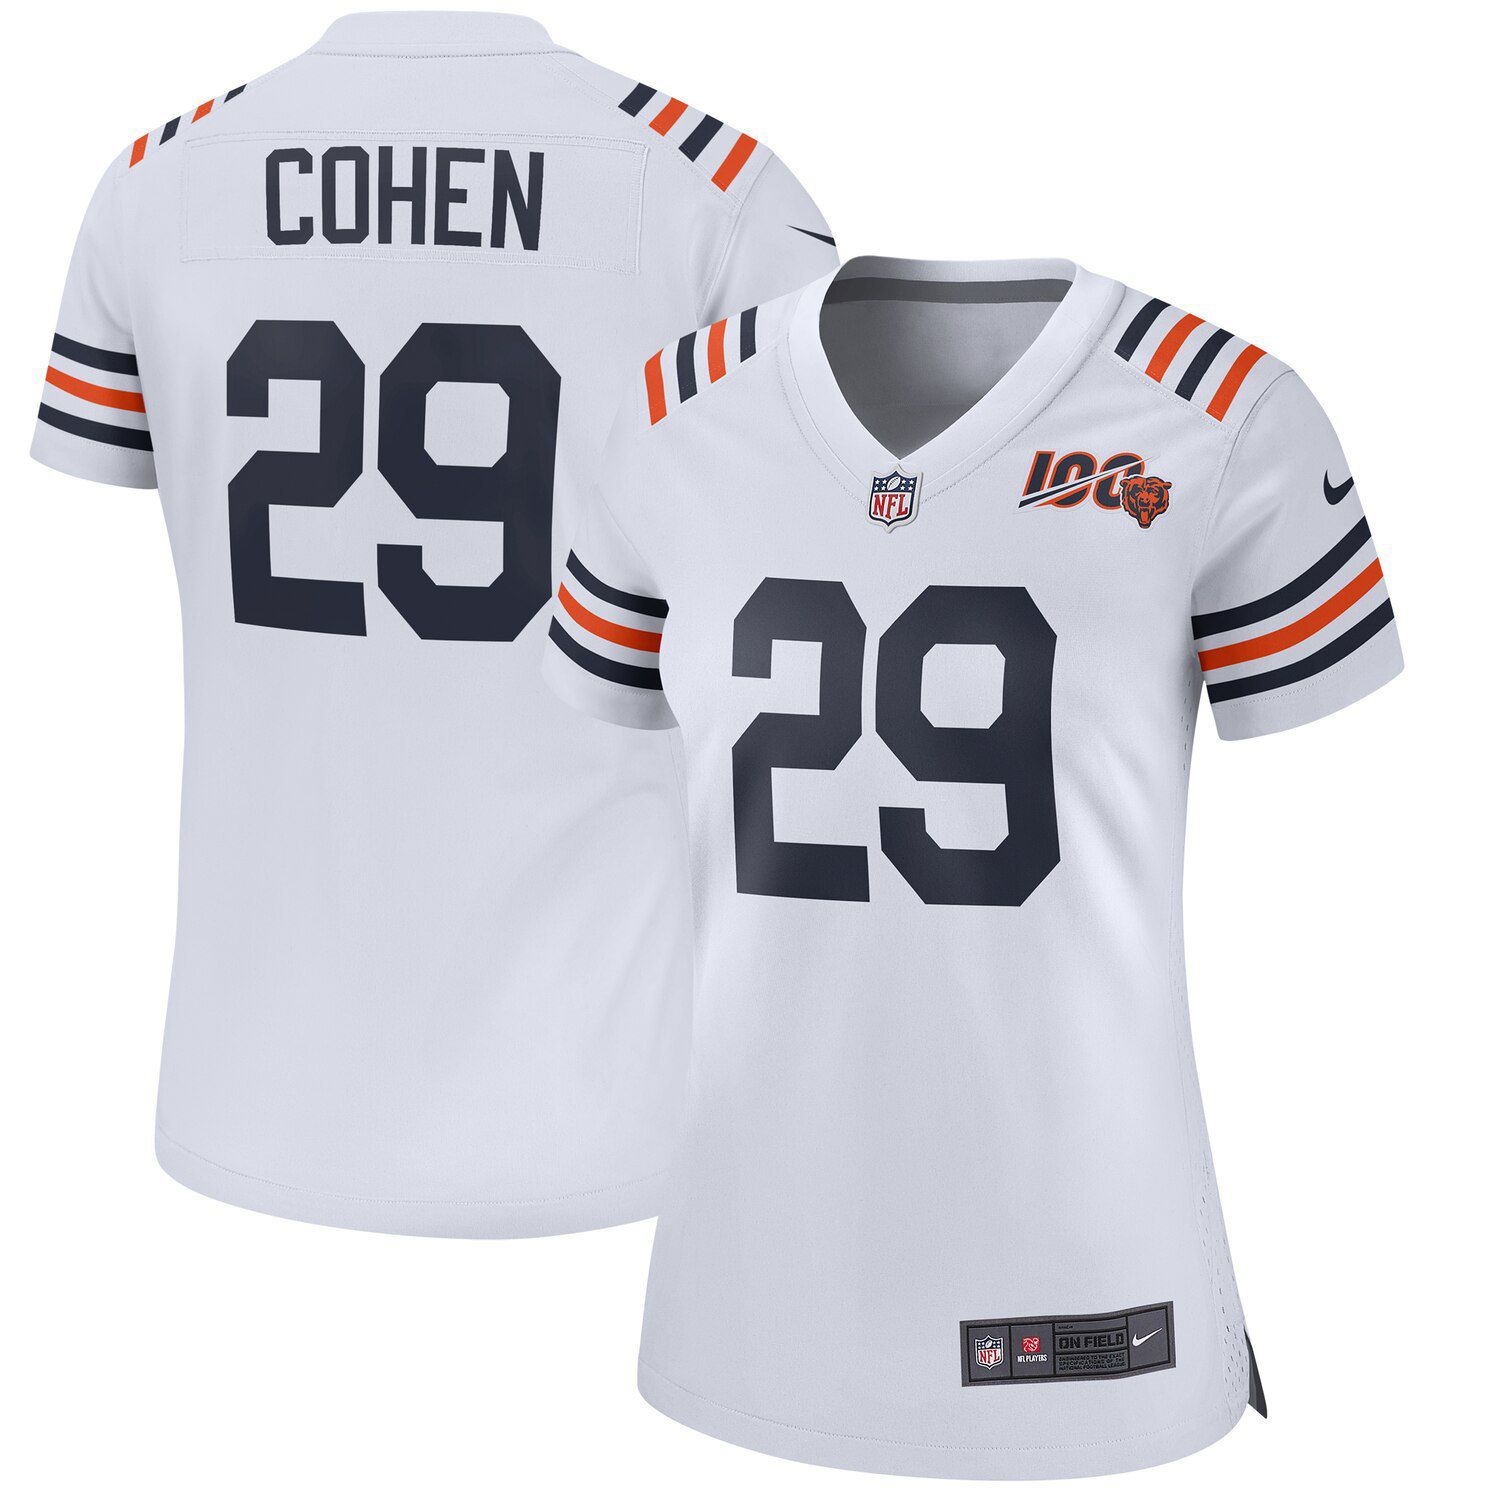 cohen chicago bears jersey